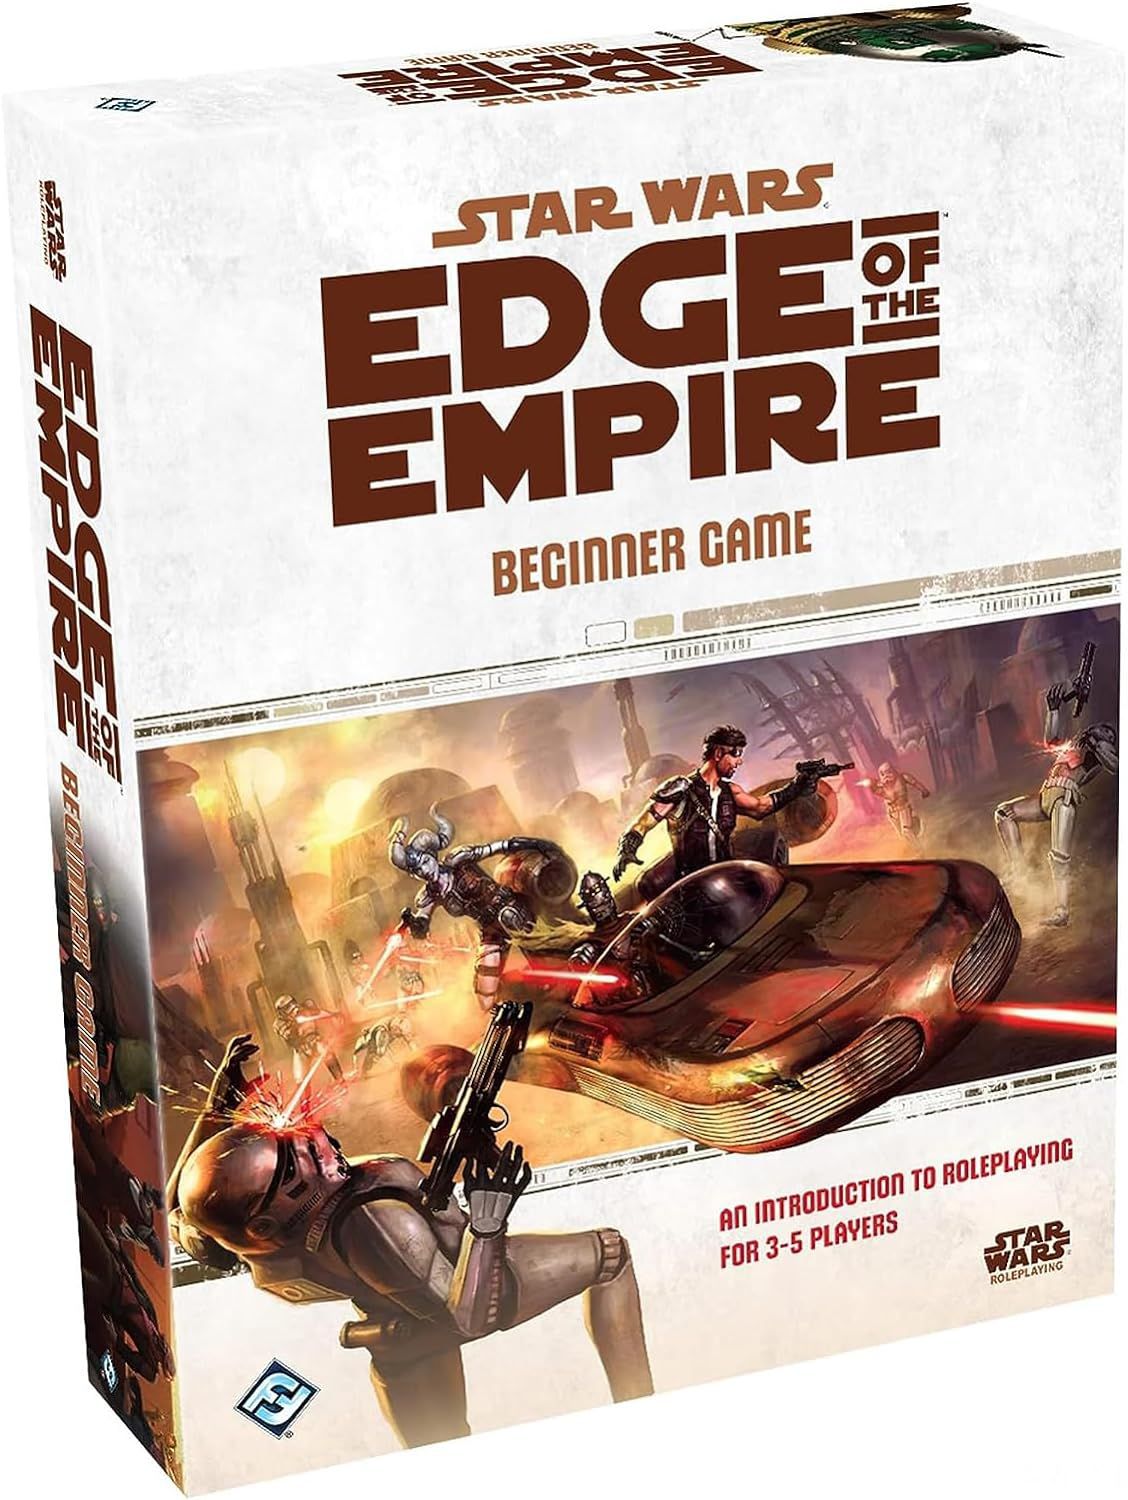 Cover art for Edge of the Empire shows some scoundrels in a speeder taking down stormtroopers on the move.